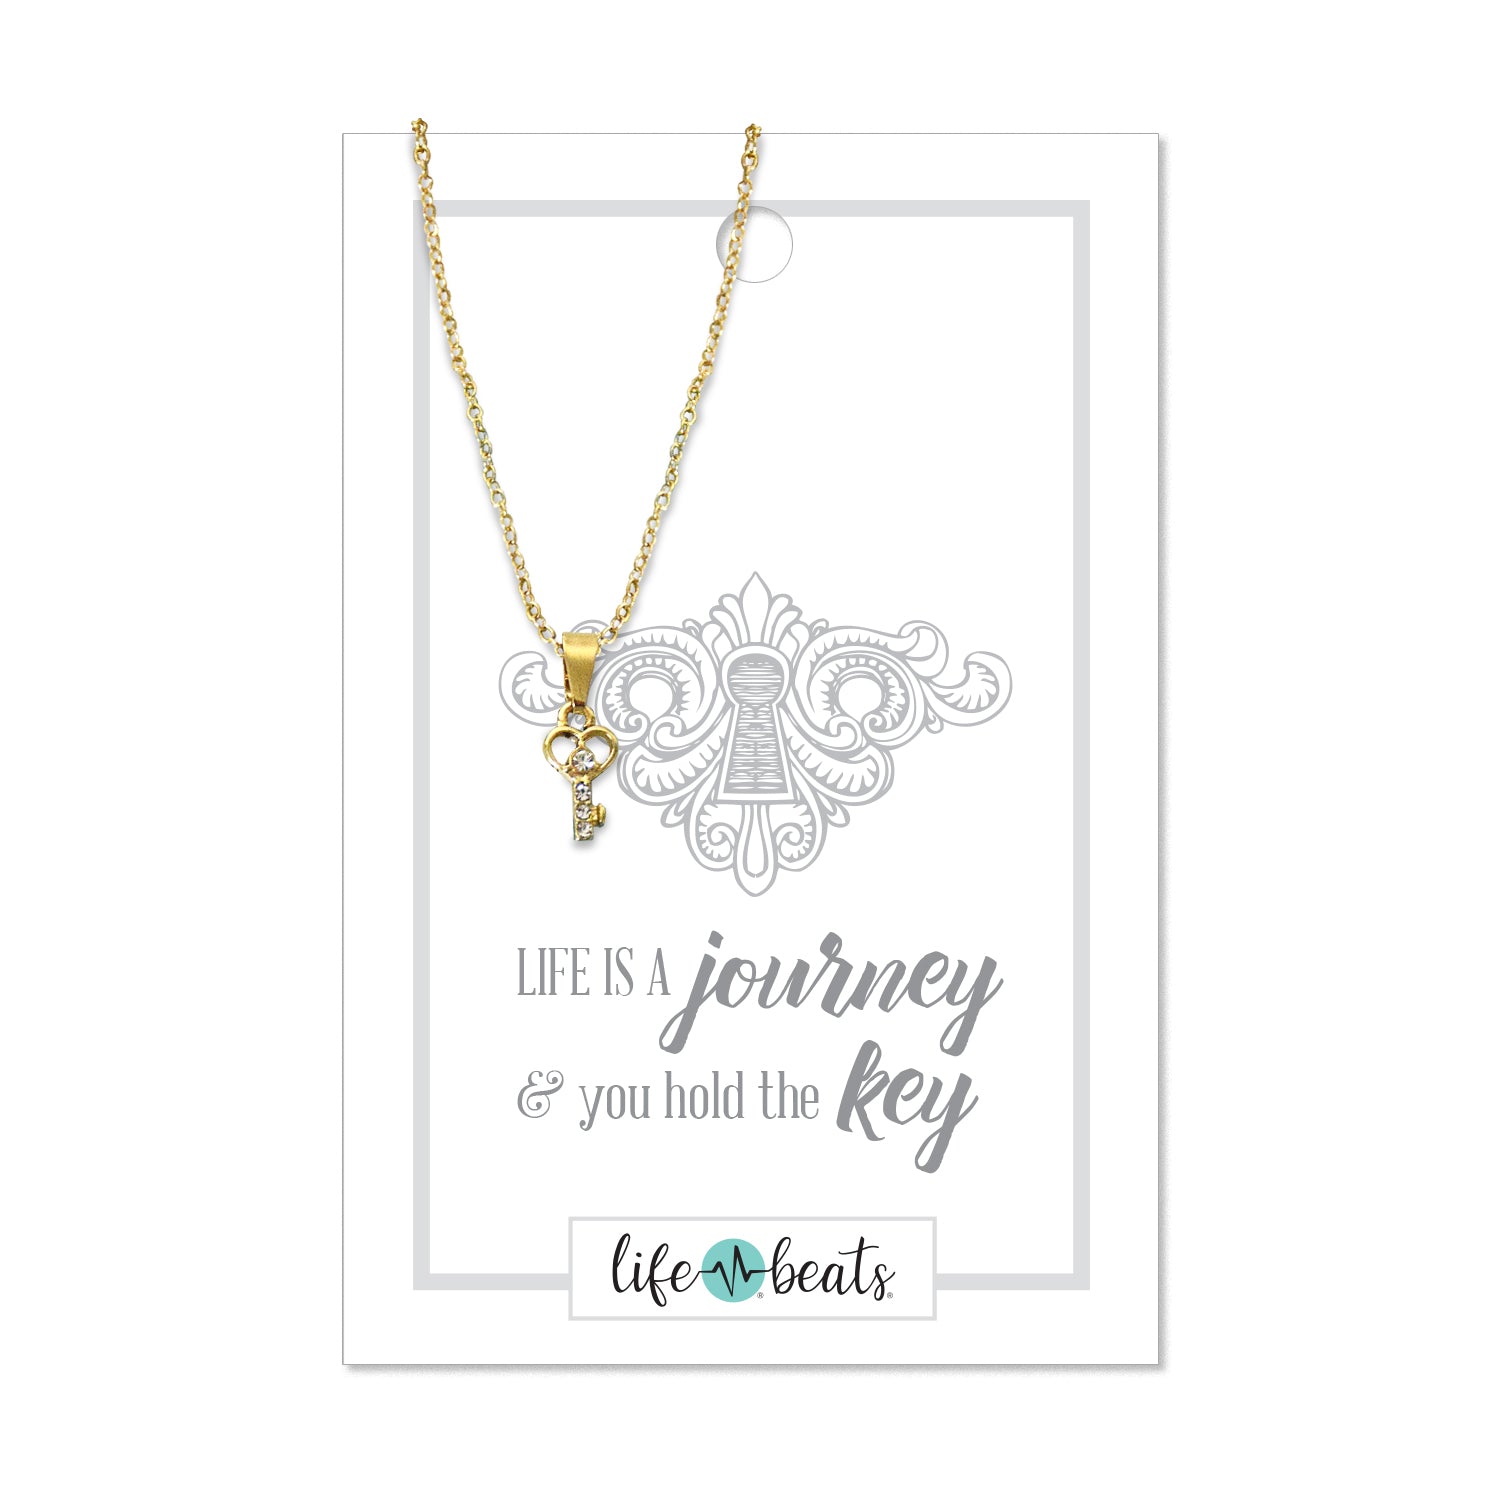 Life is a Journey - Dainty Key Necklace - Gold Finish Charm Necklace - Shop  Ringmasters